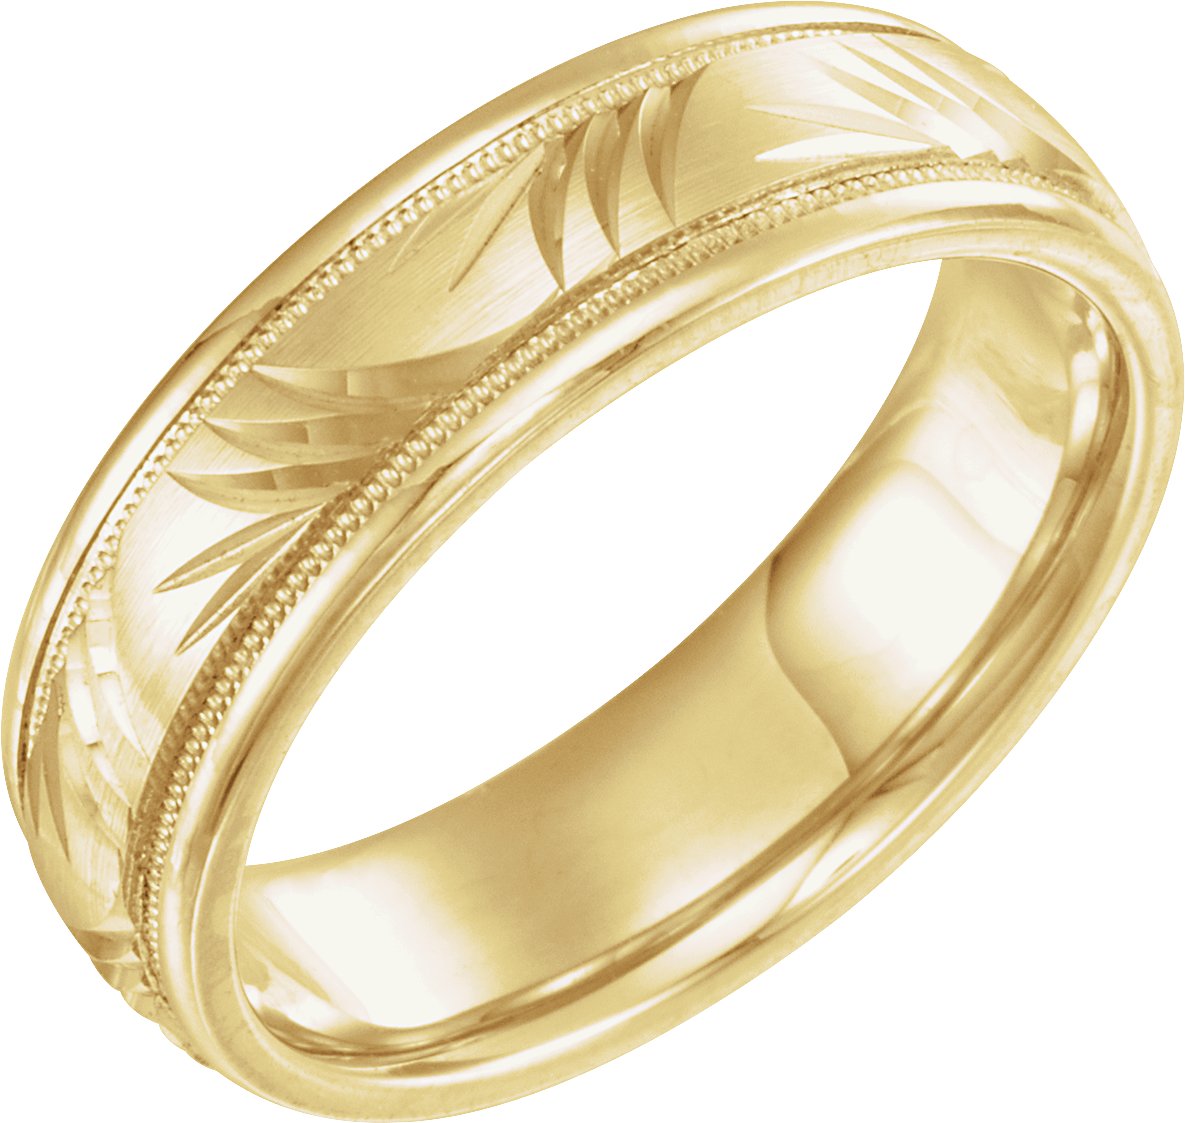 14K Yellow 6 mm Design Band Size 12 Ref 127796